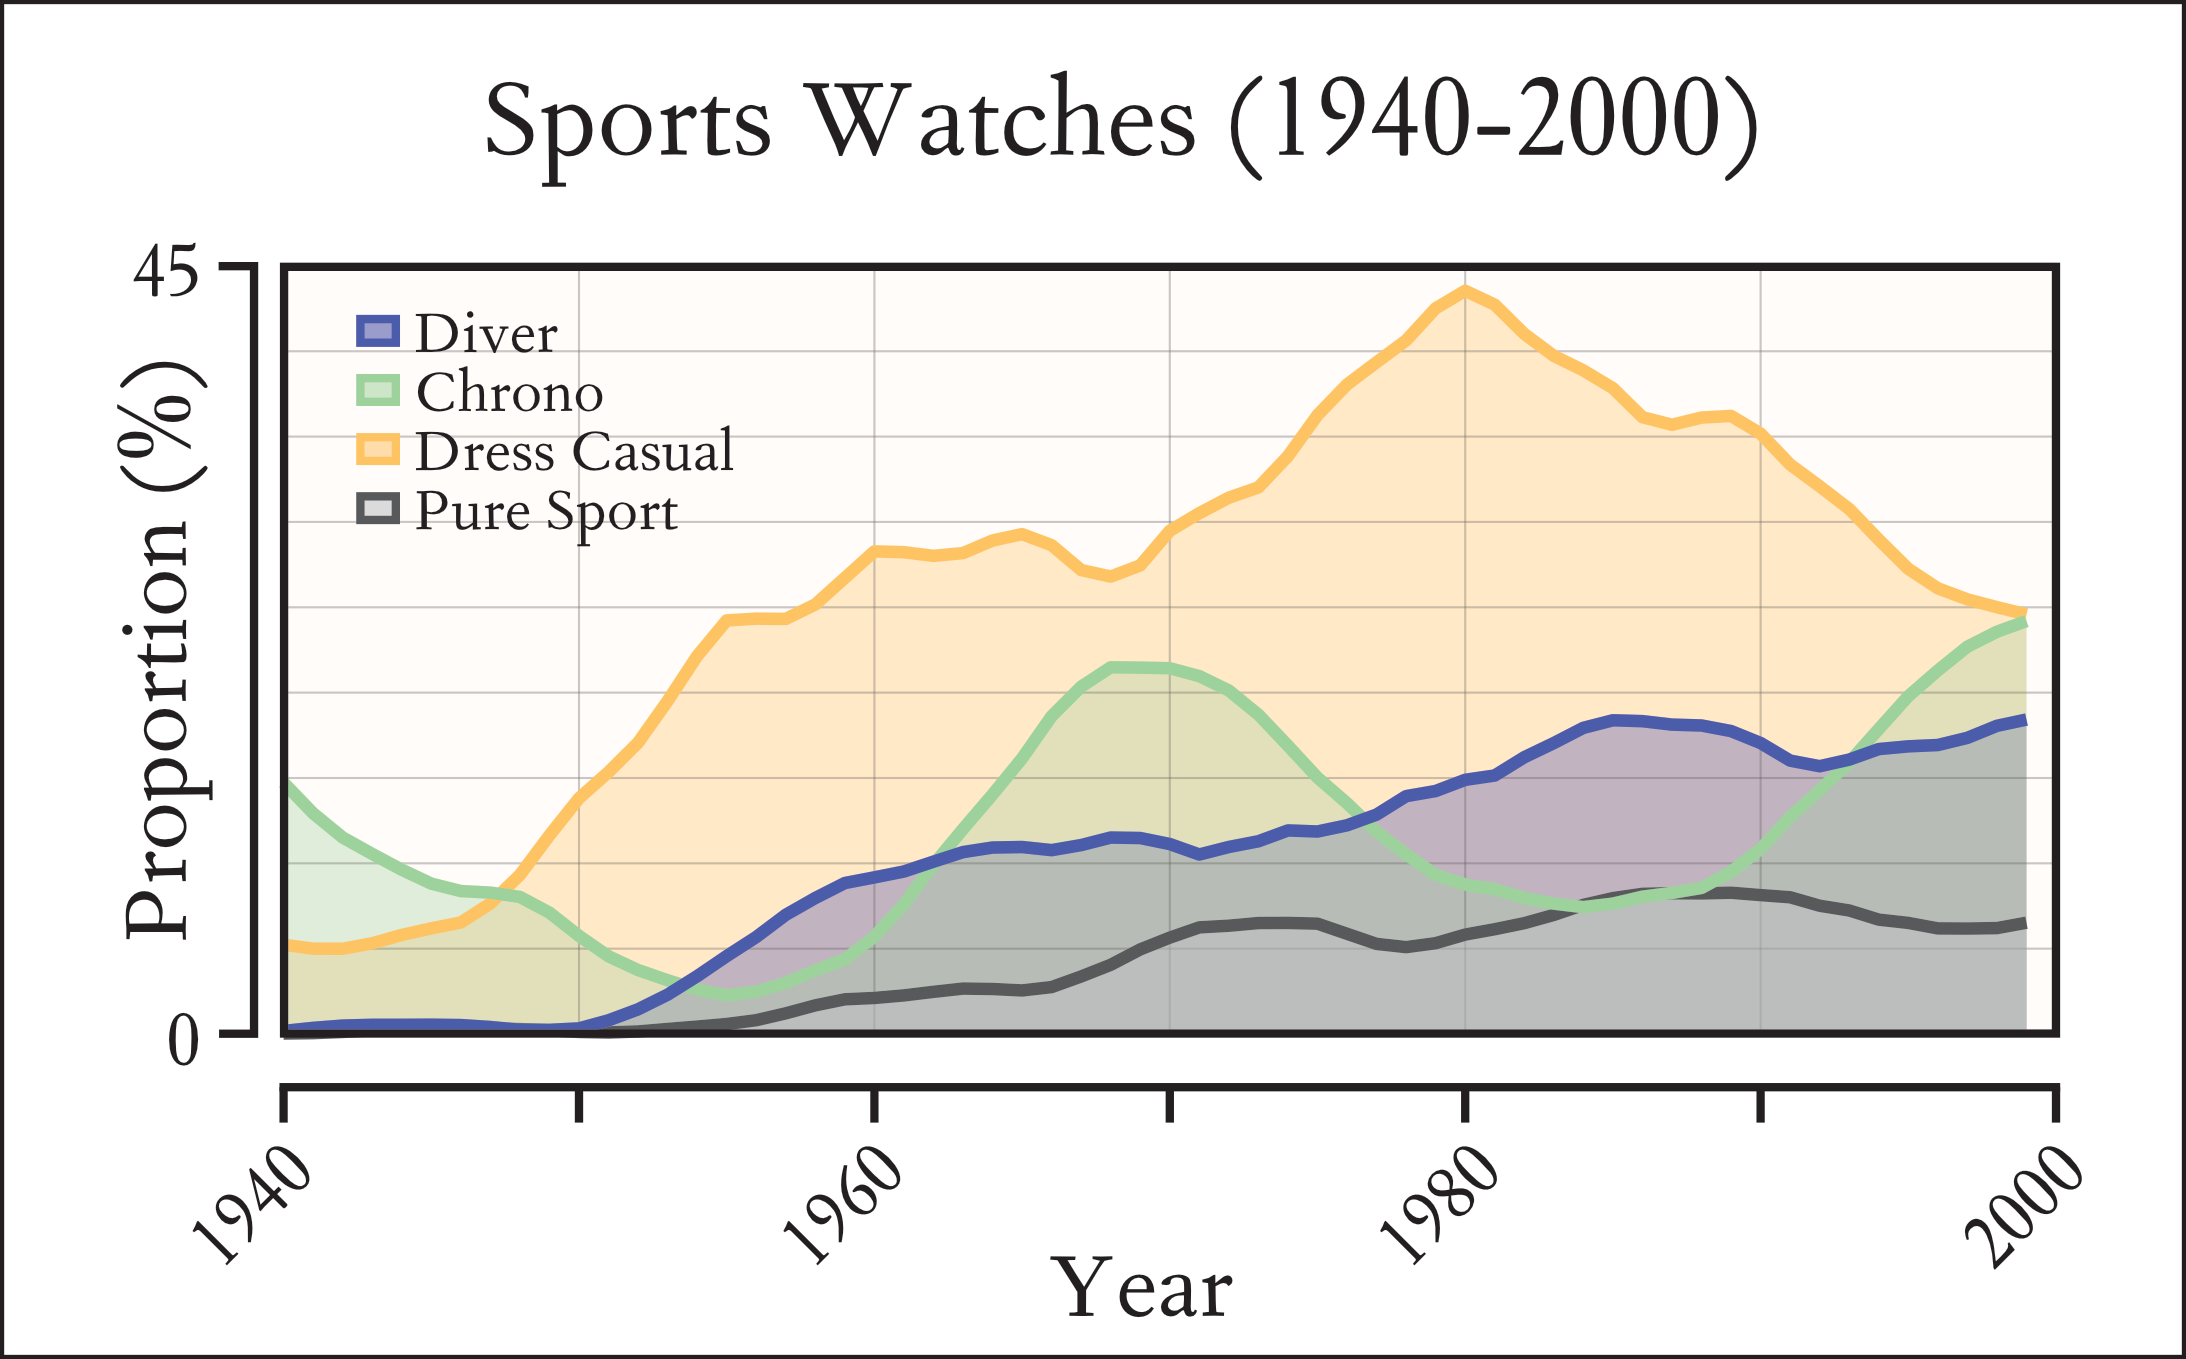 Distribution of the popularity of various sports watch genres between 1940 - 2000